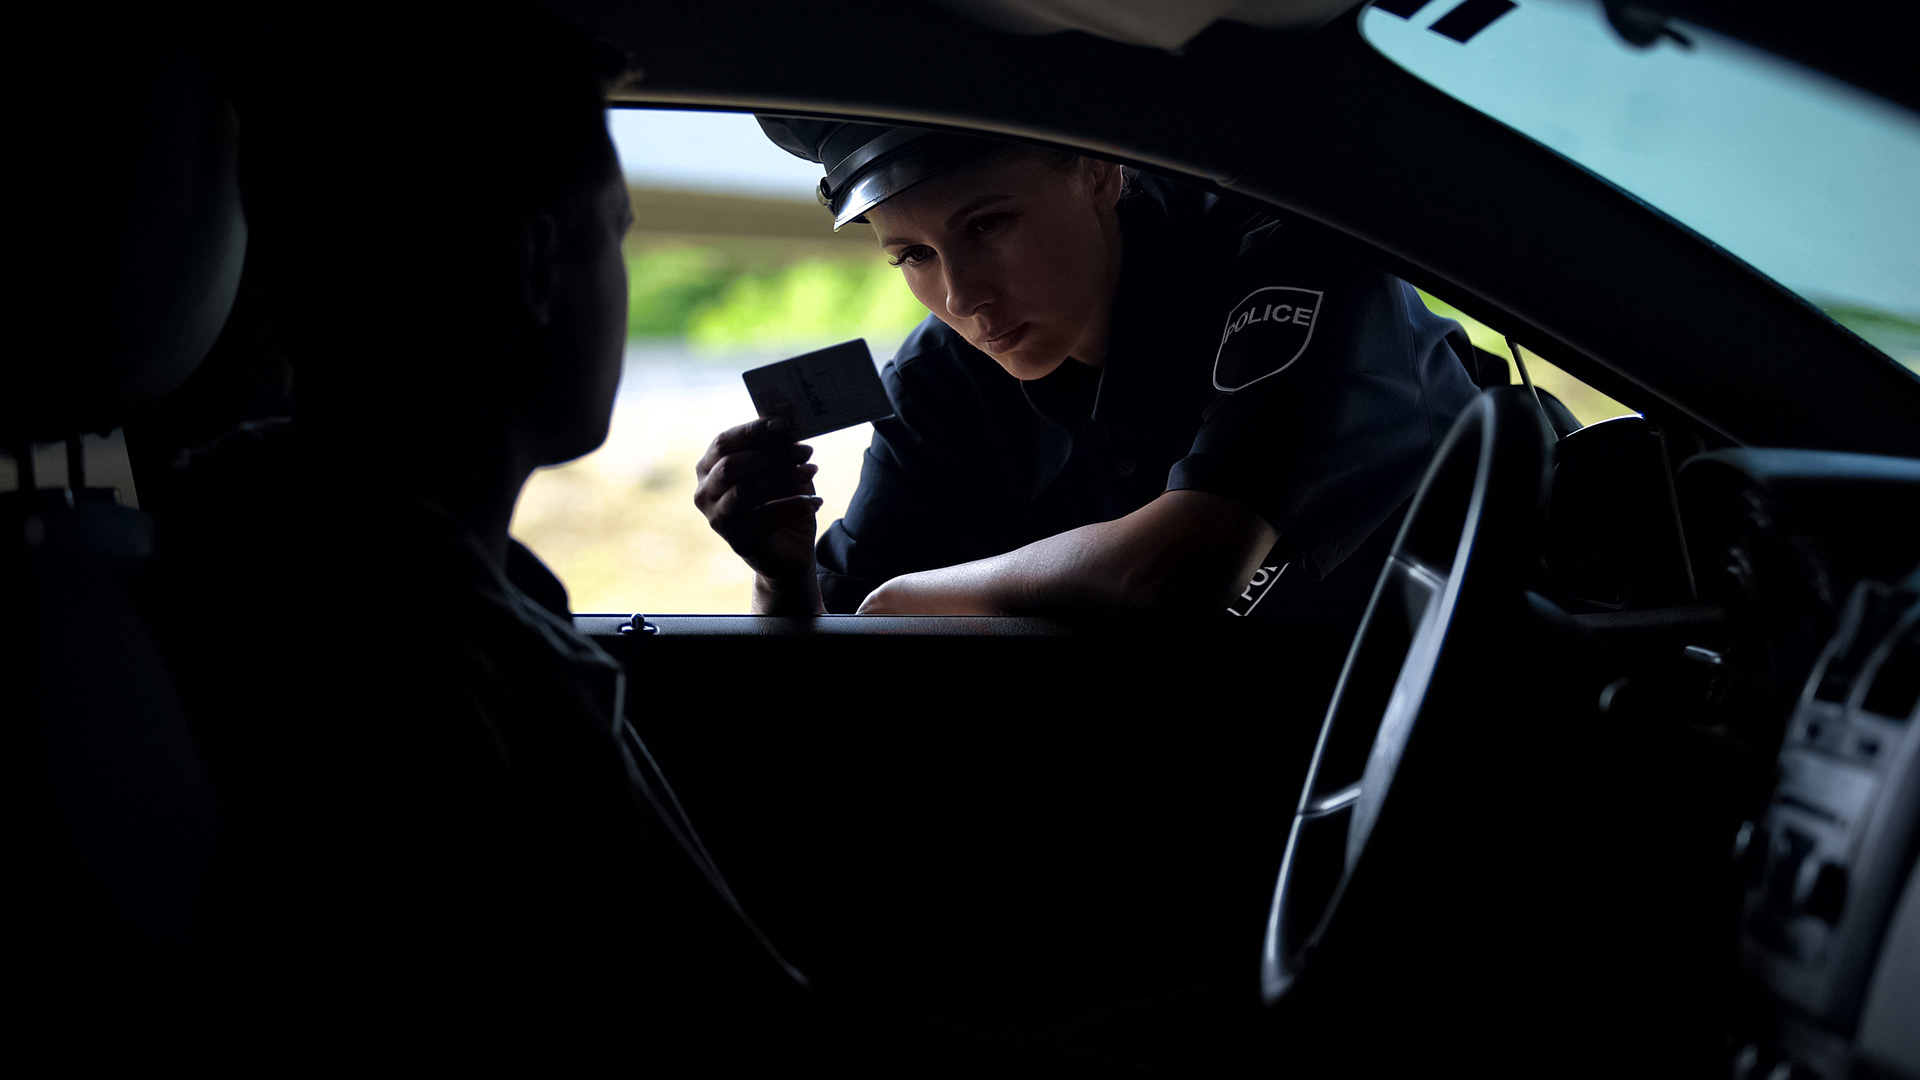 Ring's Traffic Stop feature is about bringing more accountability to  policing - The Verge